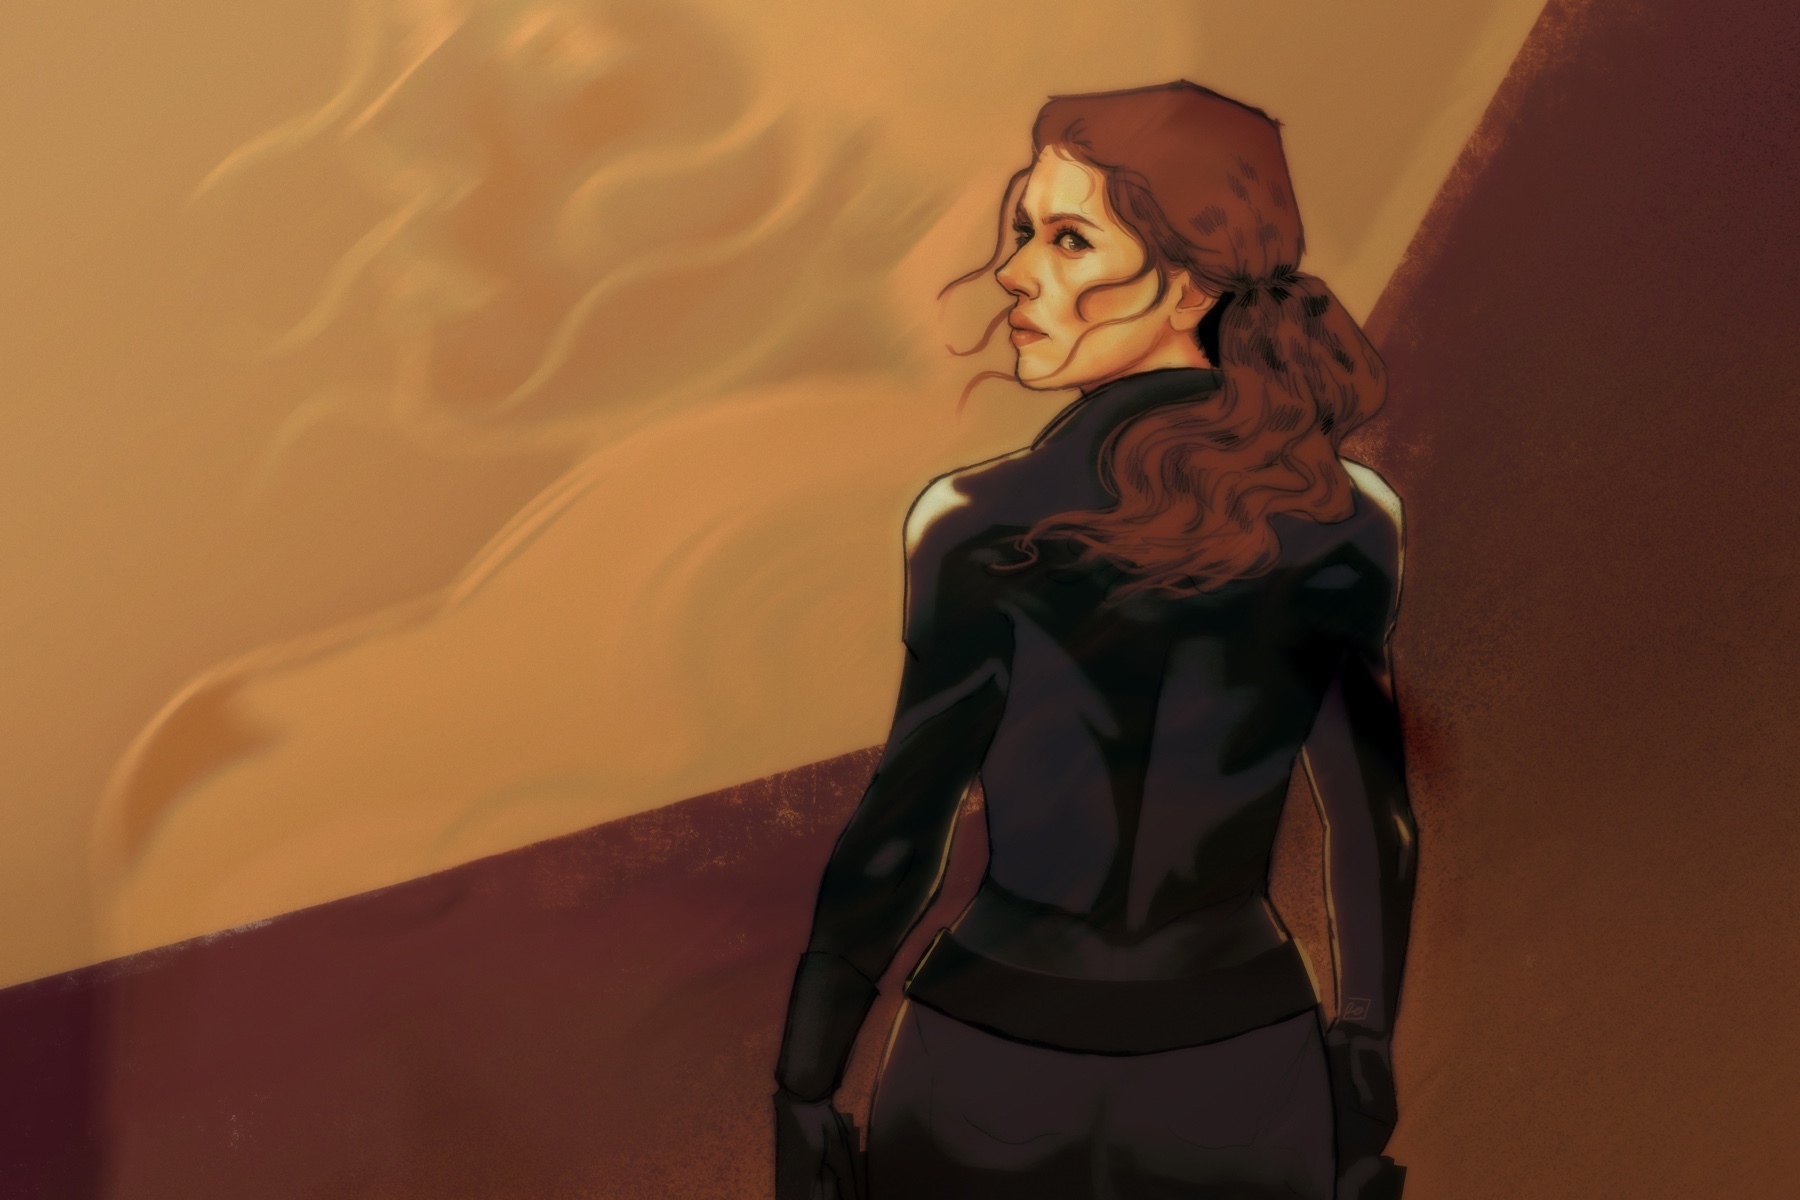 In an article about Black Widow, Natasha Romanoff faces away from the viewer against a brown and gold background.